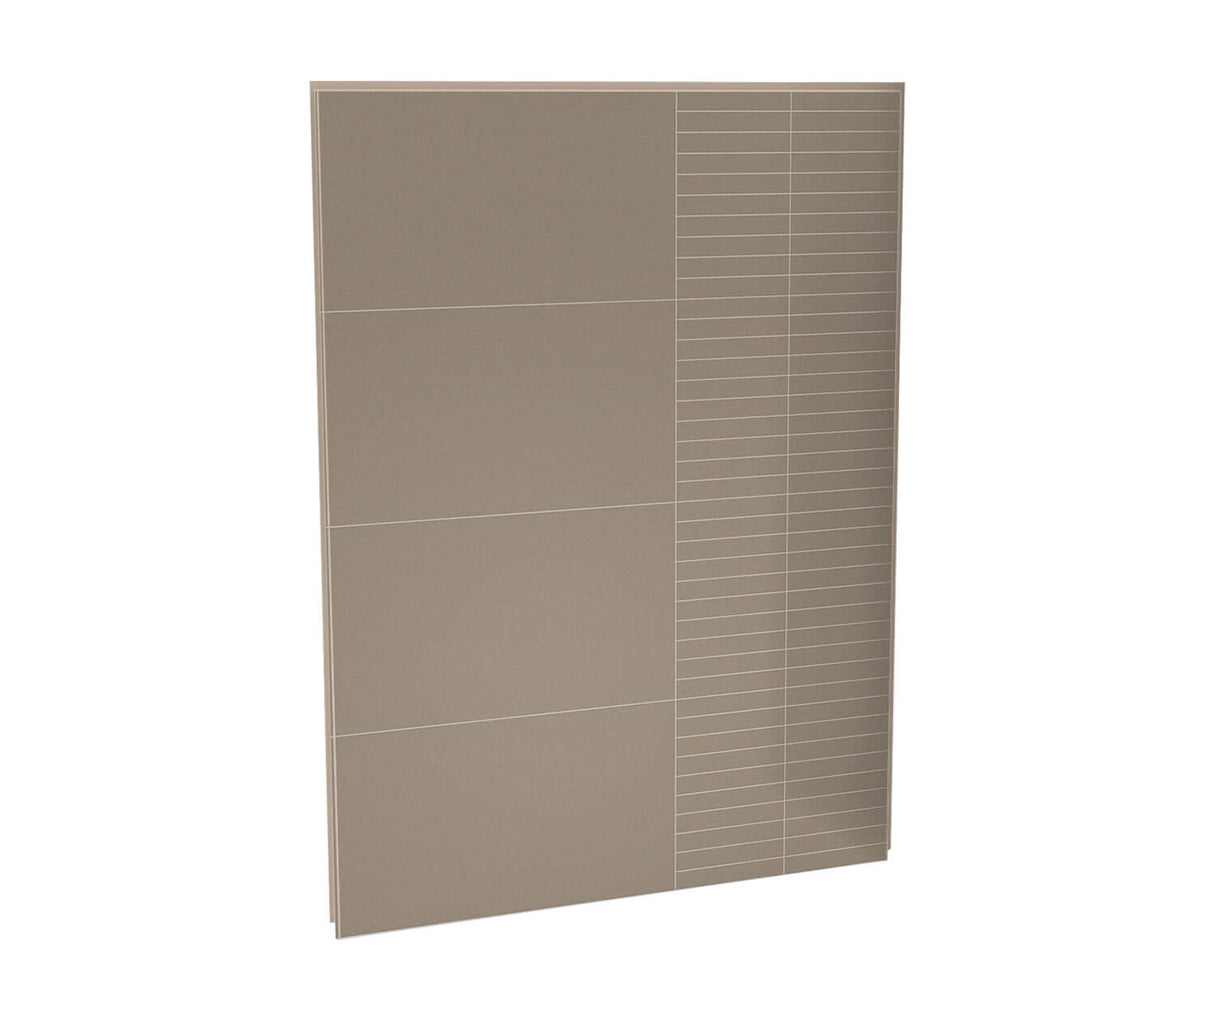 MAAX 103422-306-512 Utile 60 in. Composite Direct-to-Stud Back Wall in Erosion Taupe